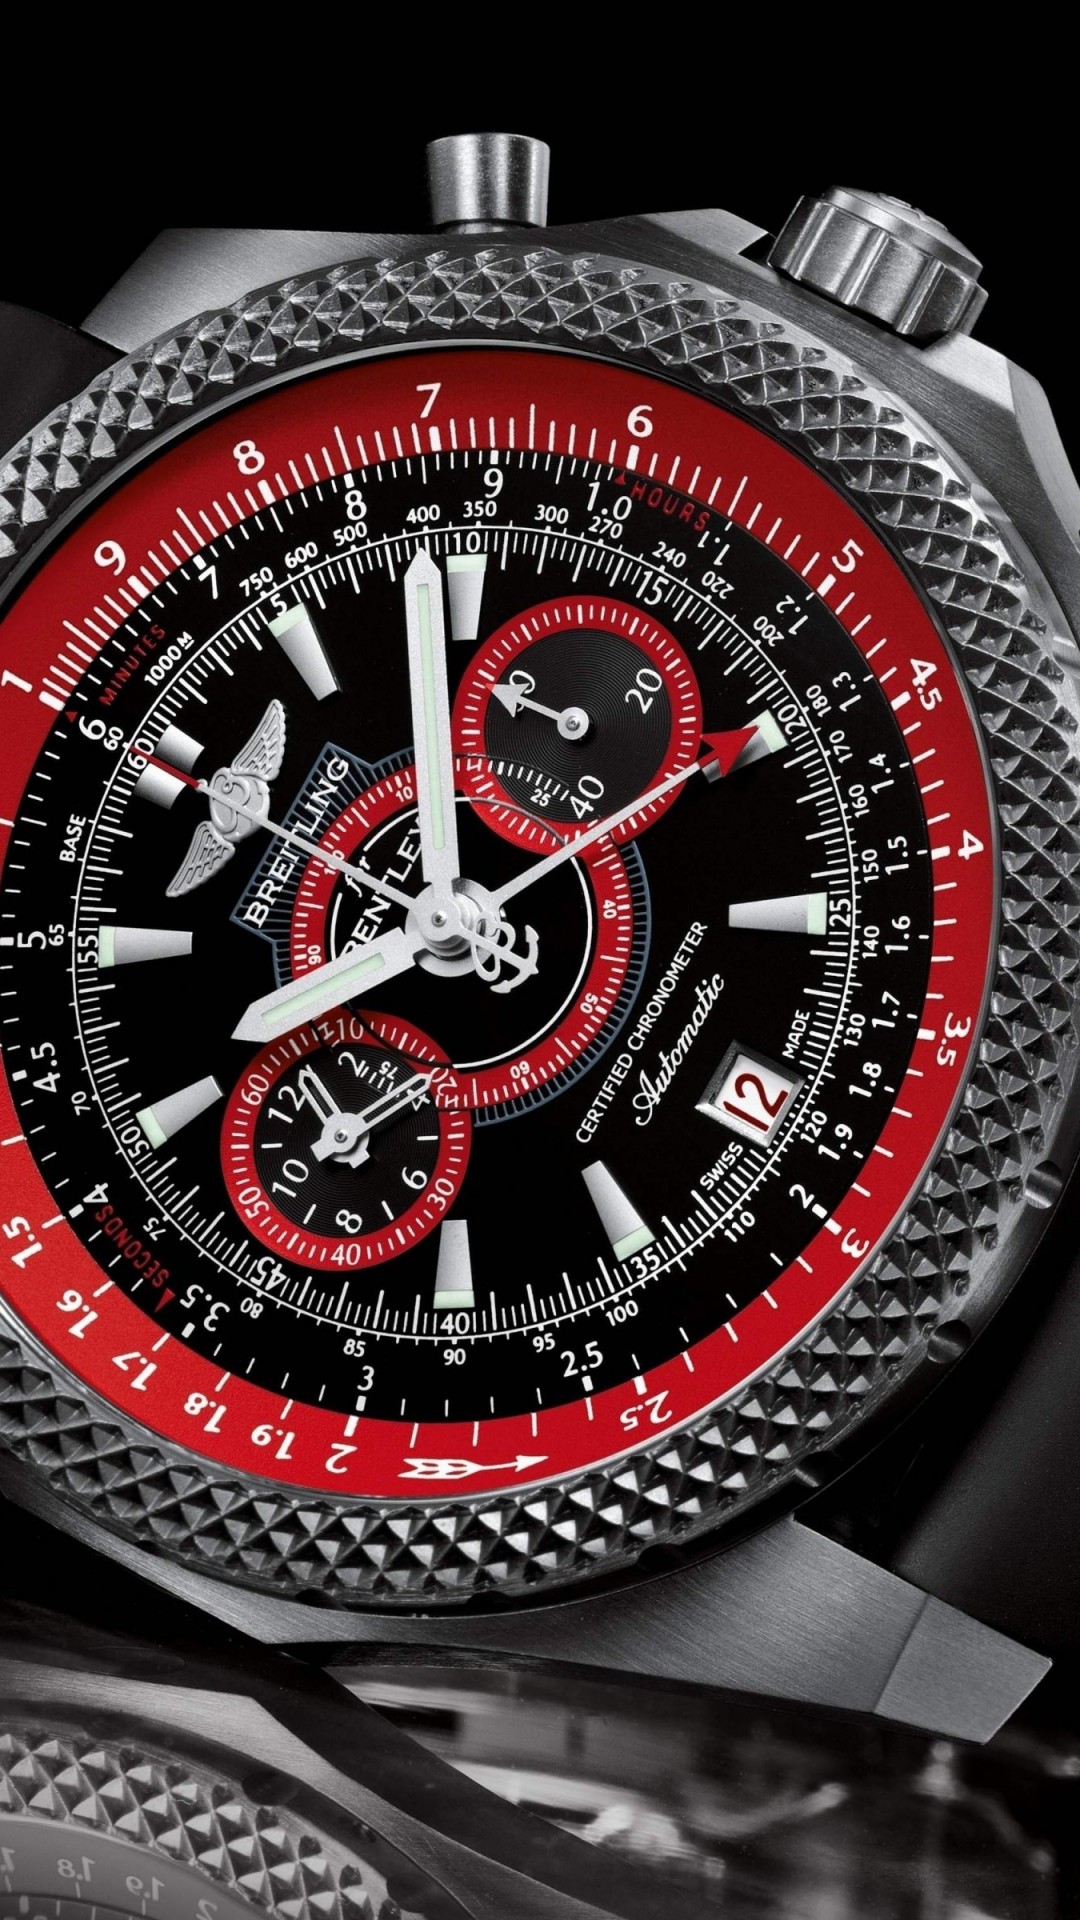 Breitling Watch Wallpaper for SAMSUNG Galaxy Note 3